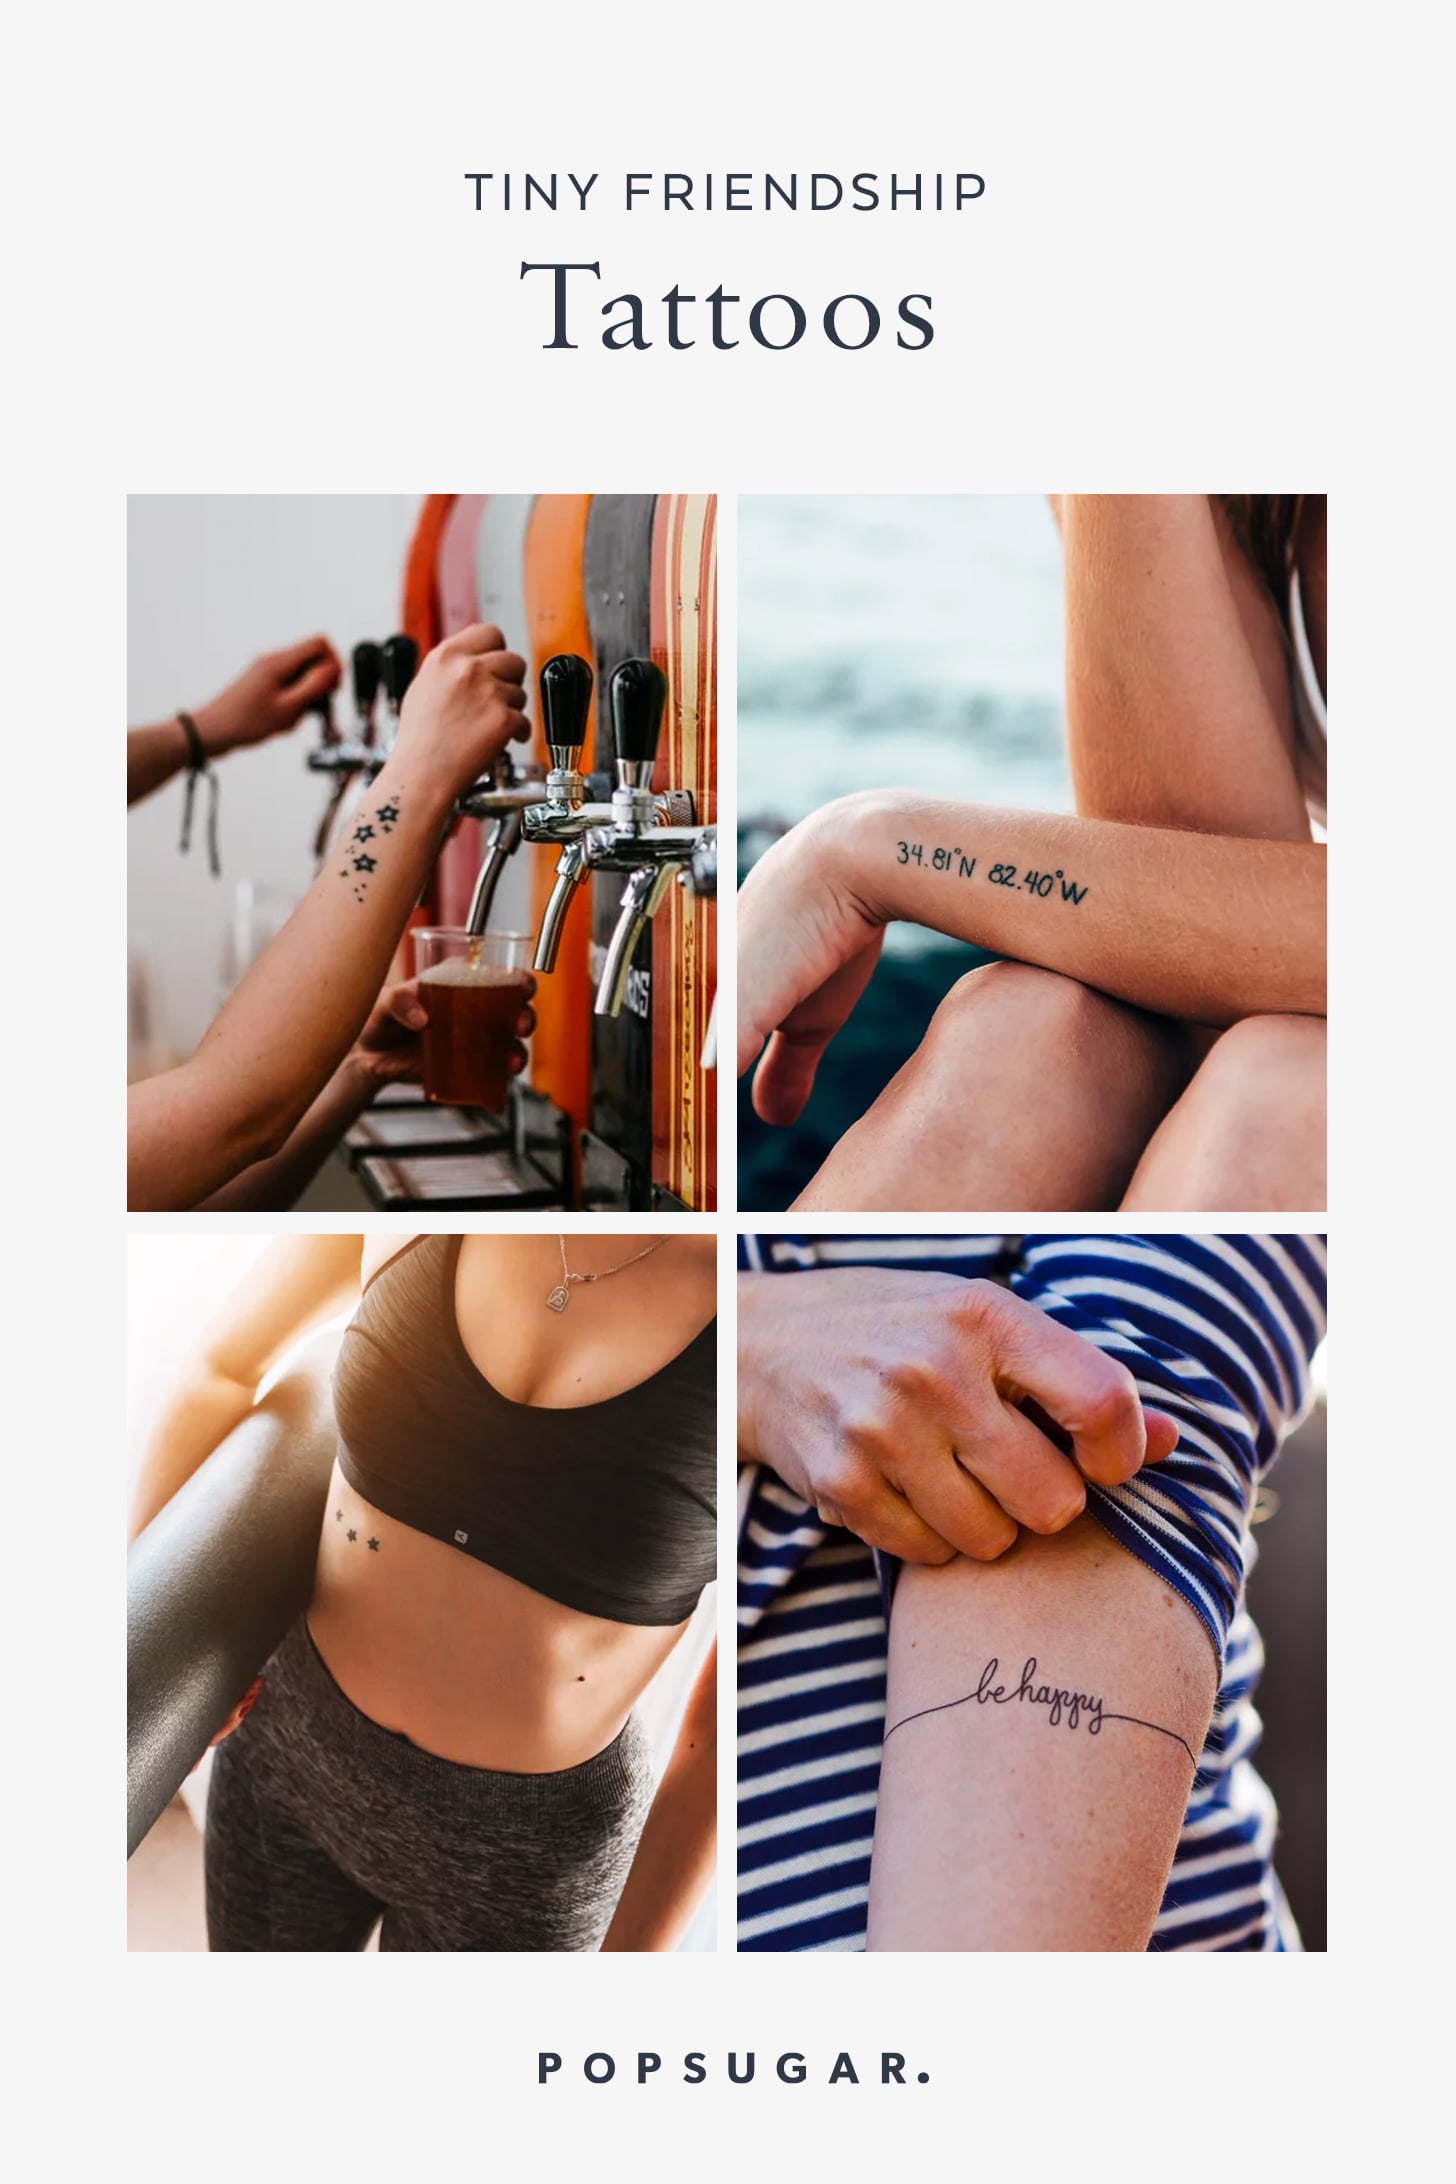 50 Tiny Friendship Tattoos To Get With Your Best Friend Popsugar Beauty